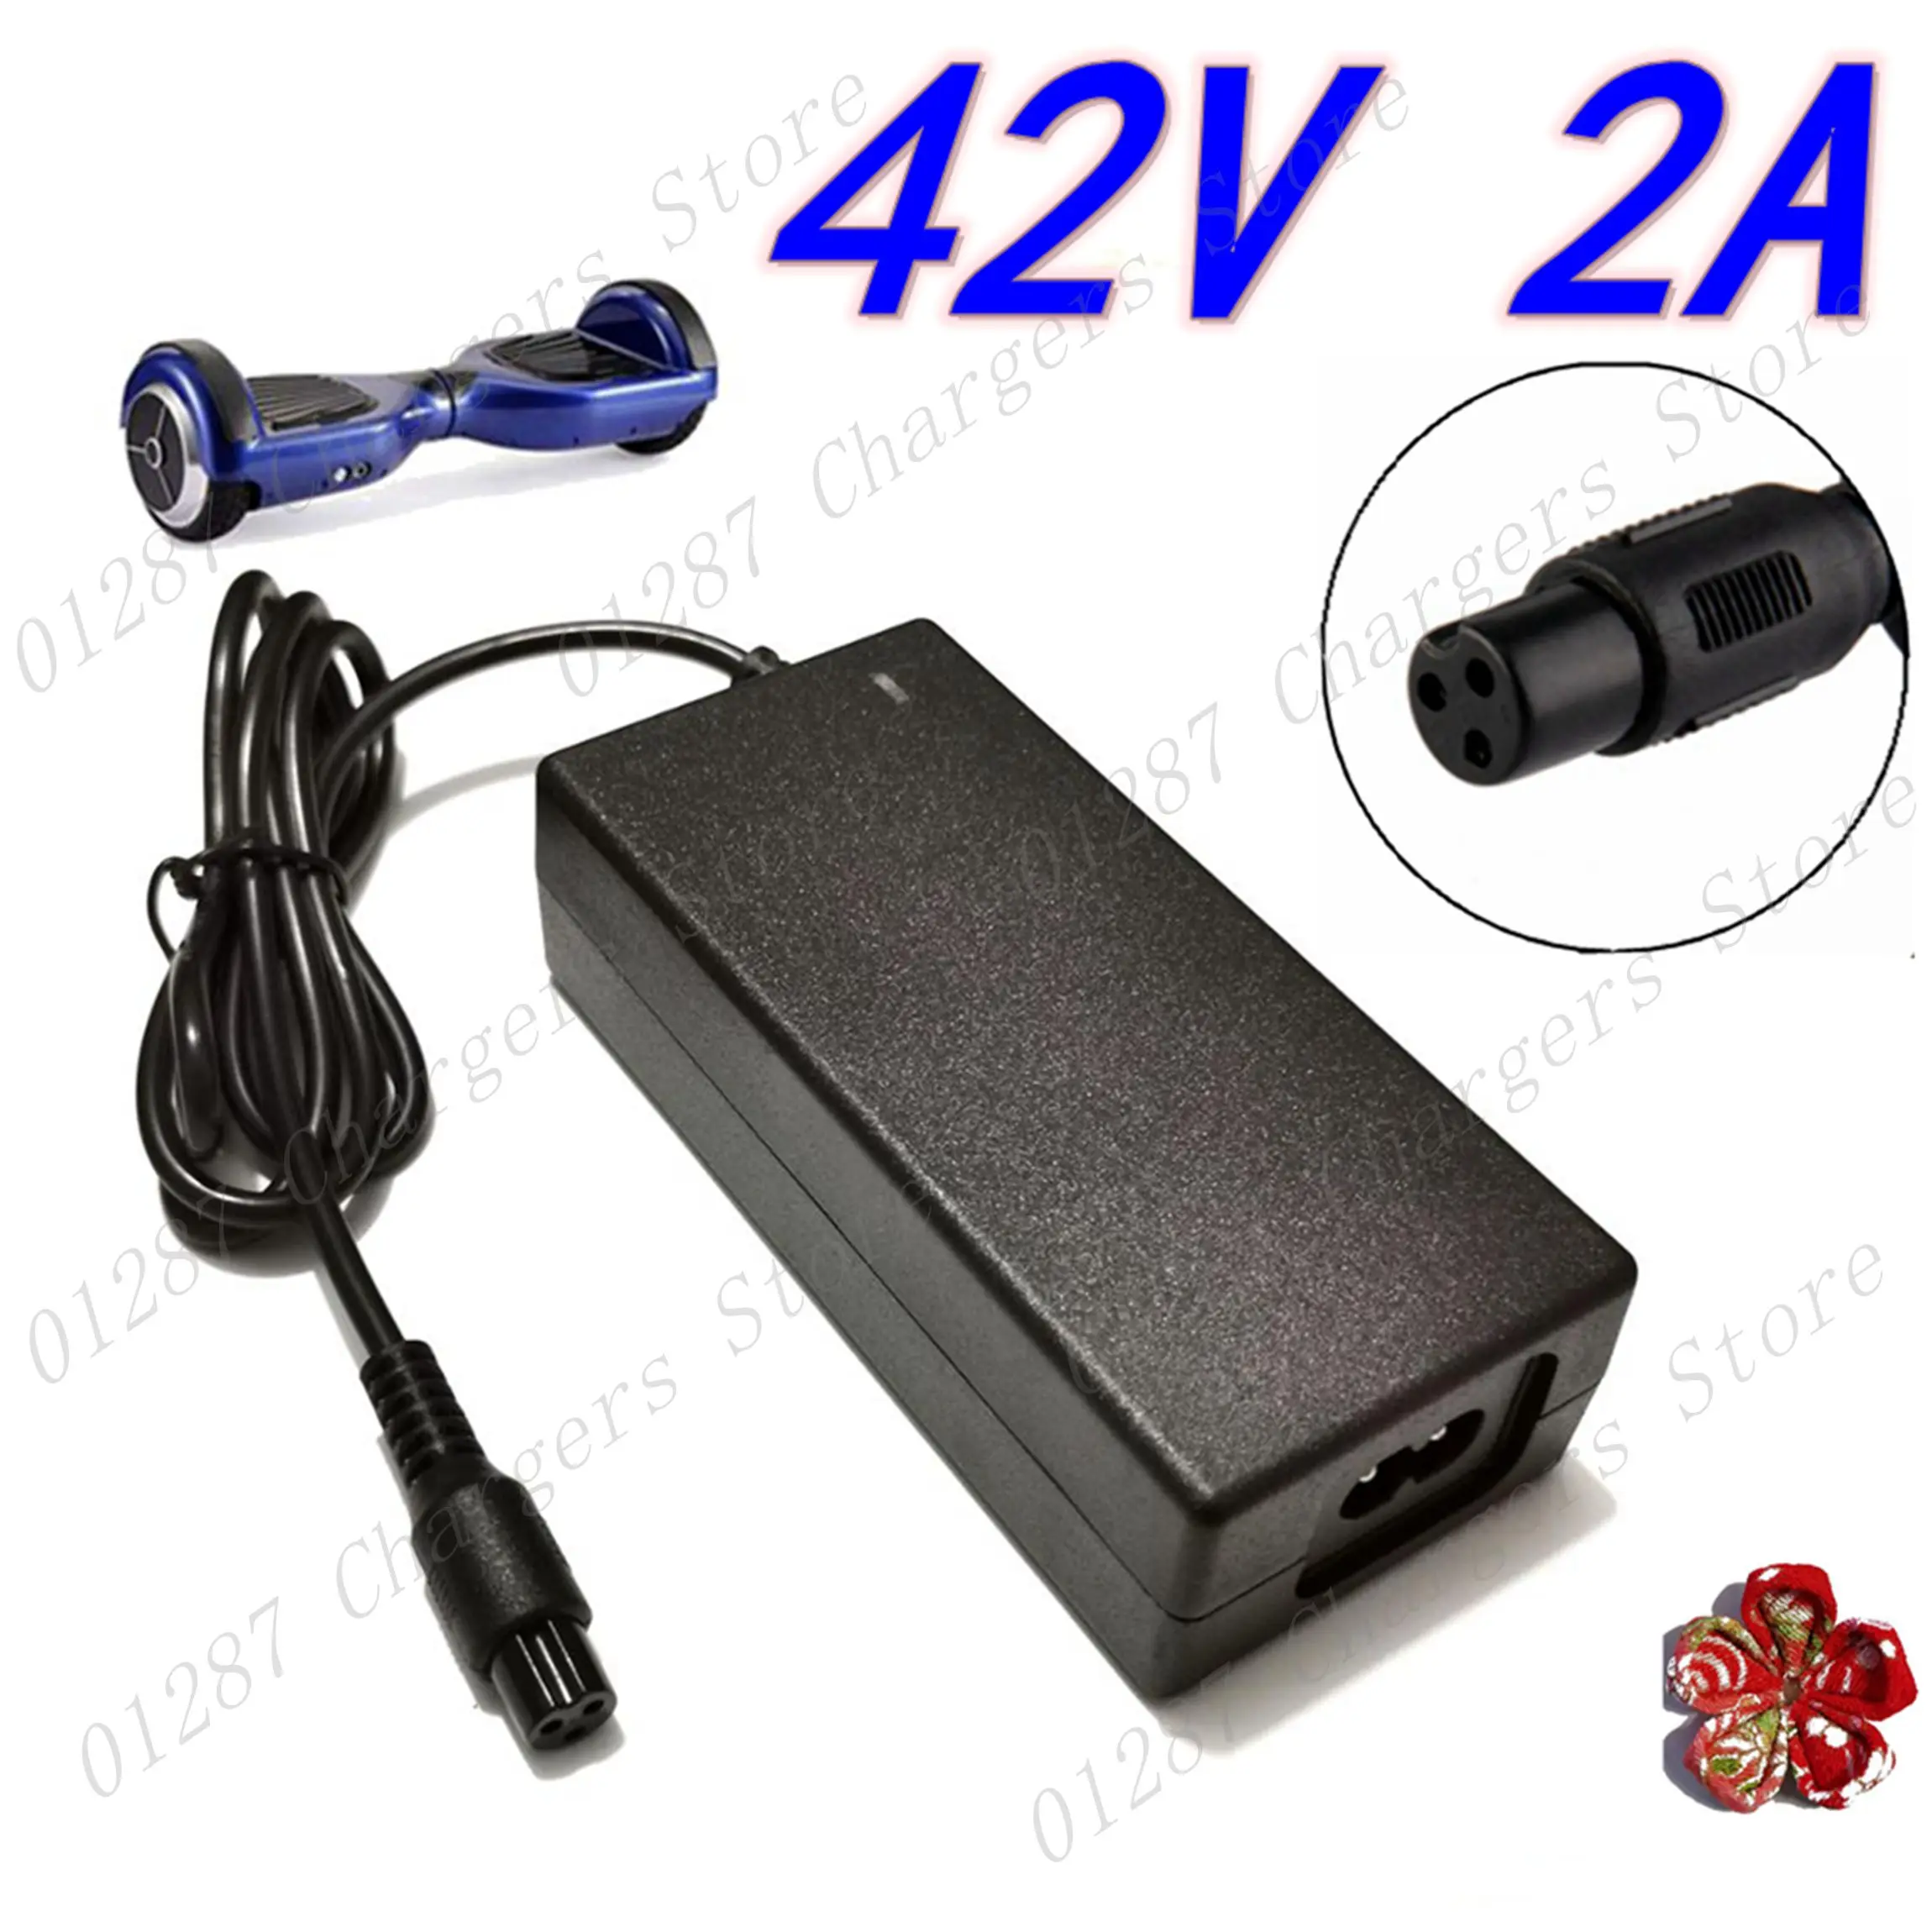 

42V 2A Universal Battery Charger, UK/EU/US/AU Plug，100-240VAC Power Supply for Self Balancing Scooter hoverboard charger